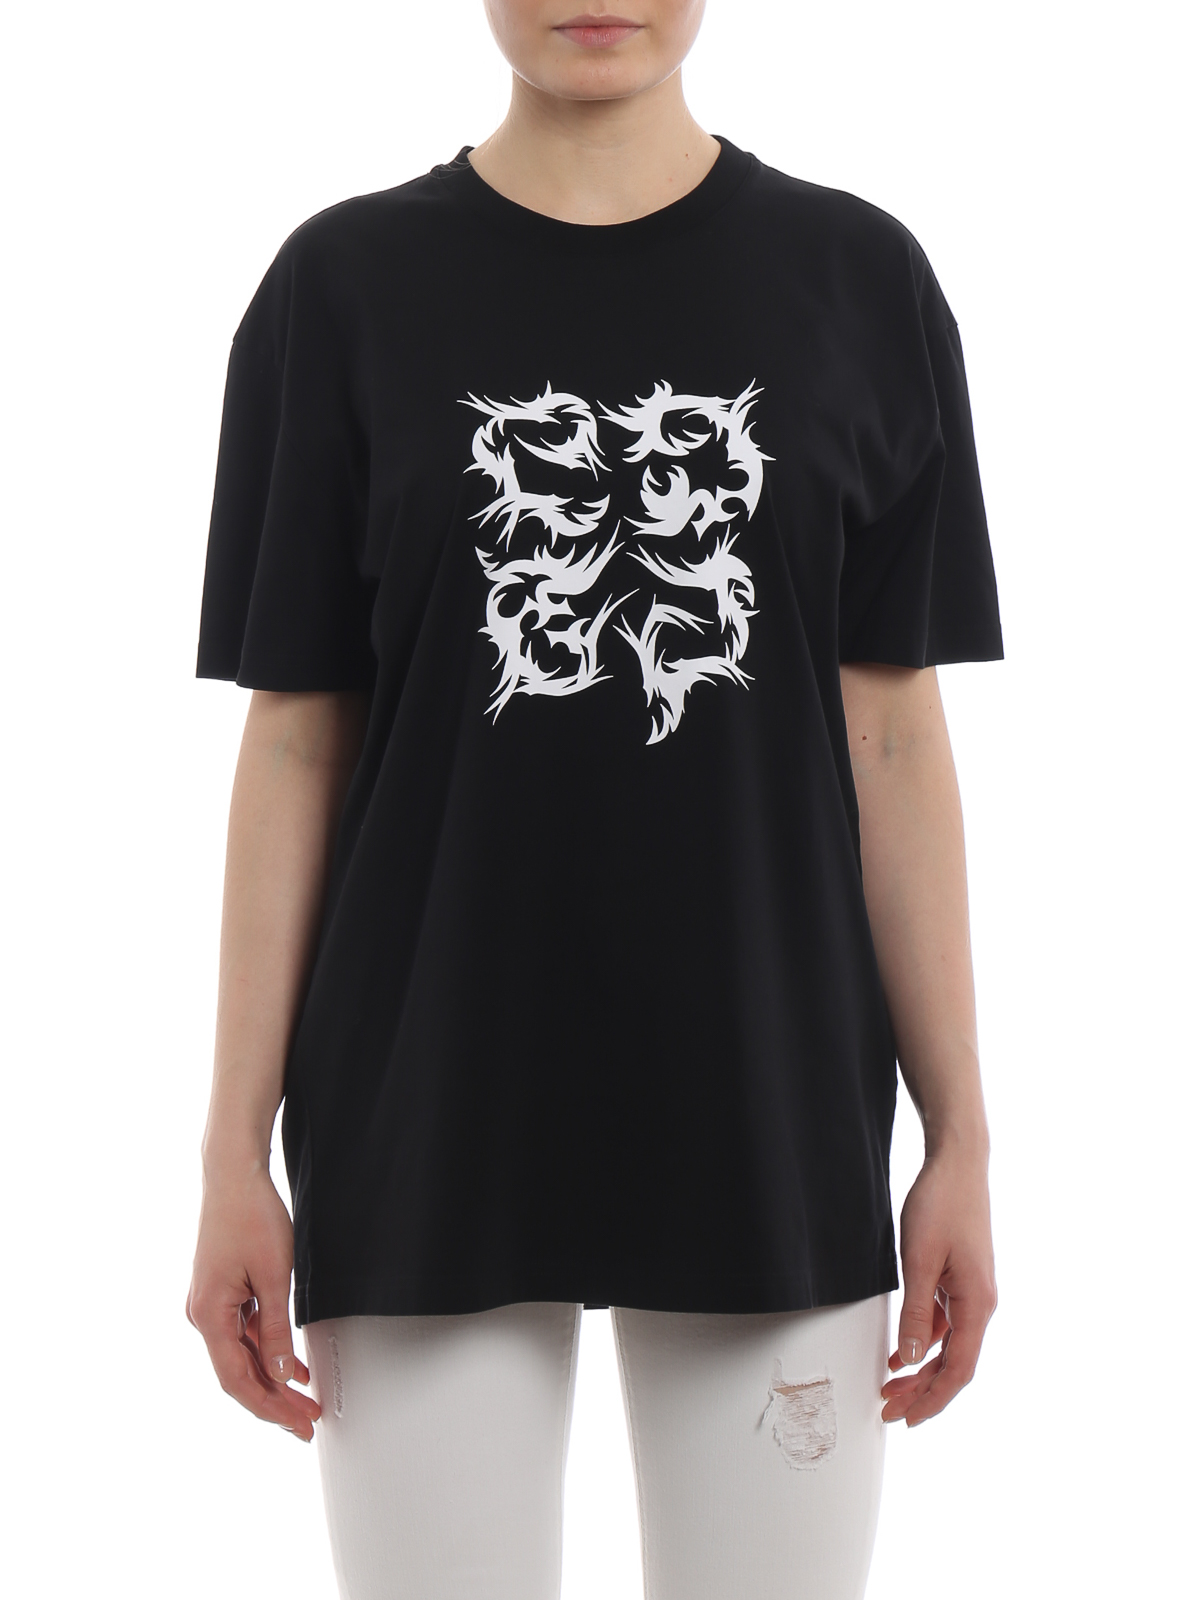 givenchy flame t shirt